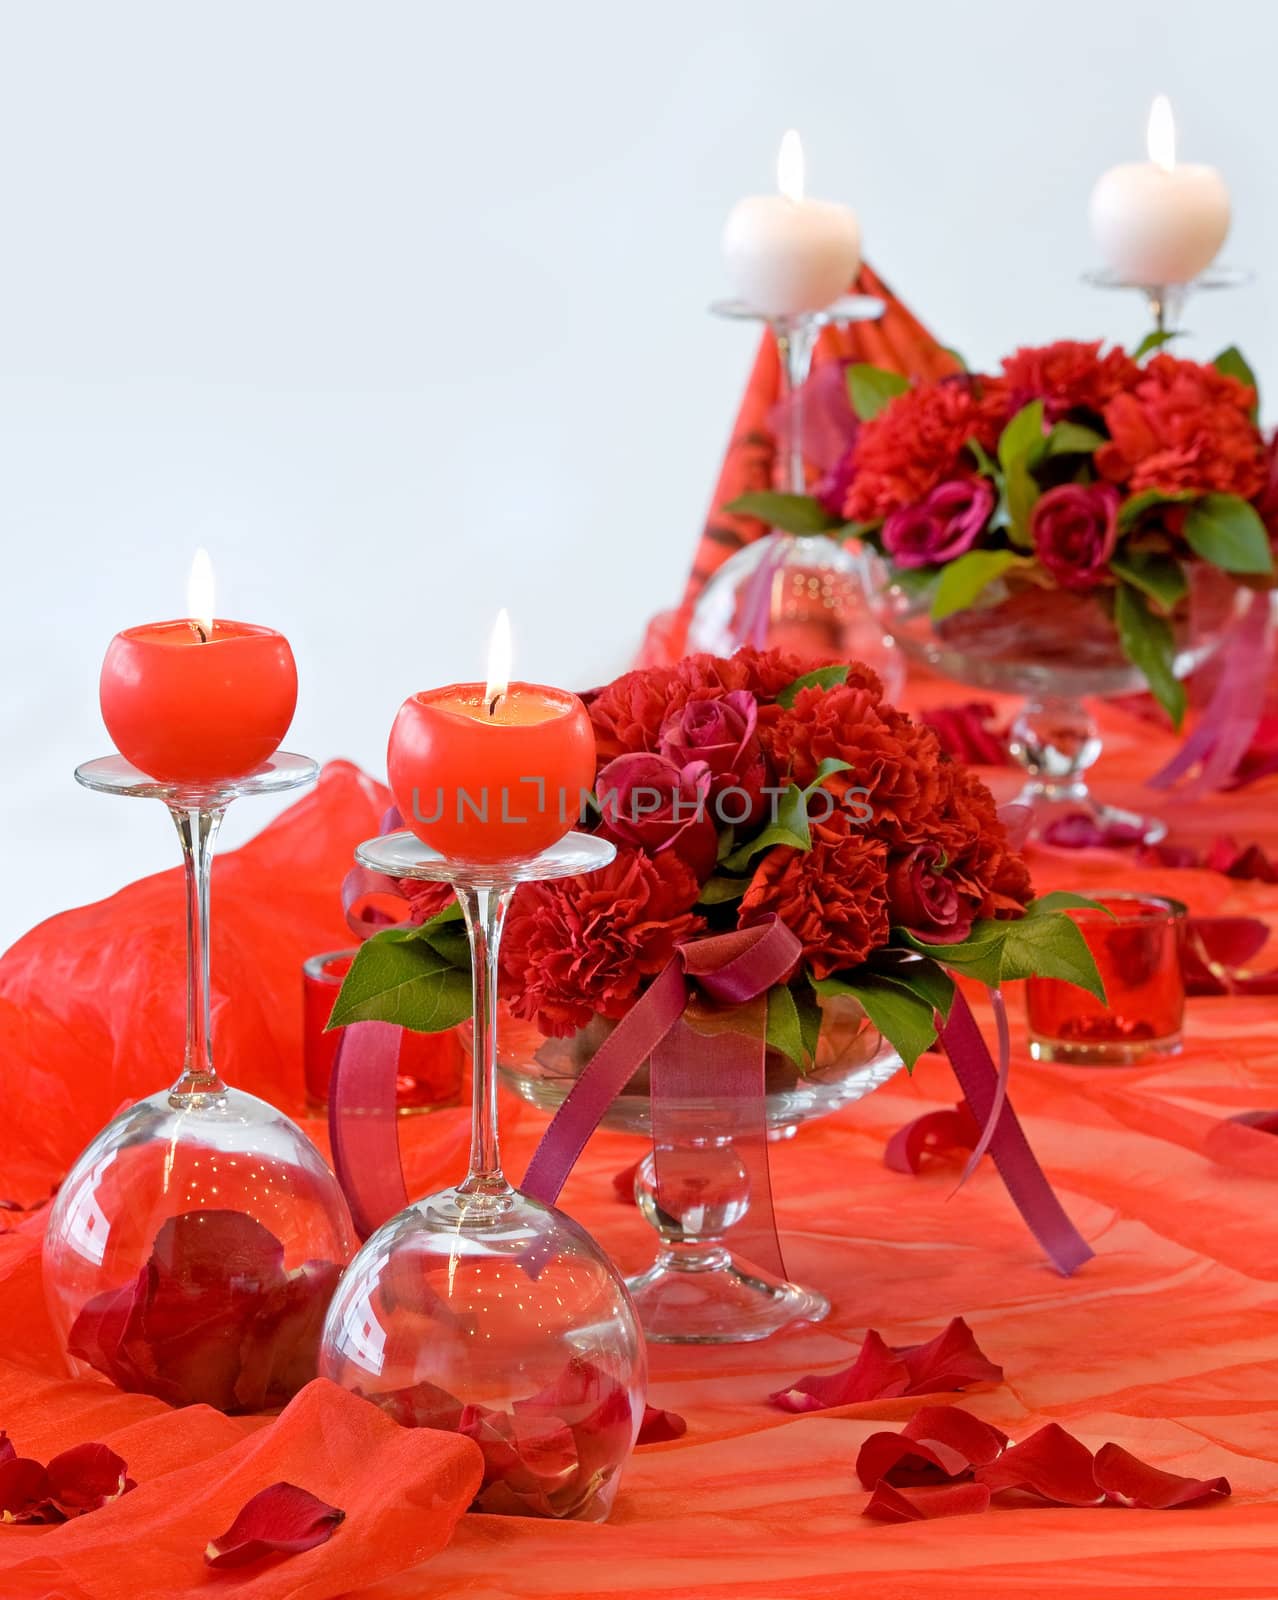 Decorated table by fotoedgaras